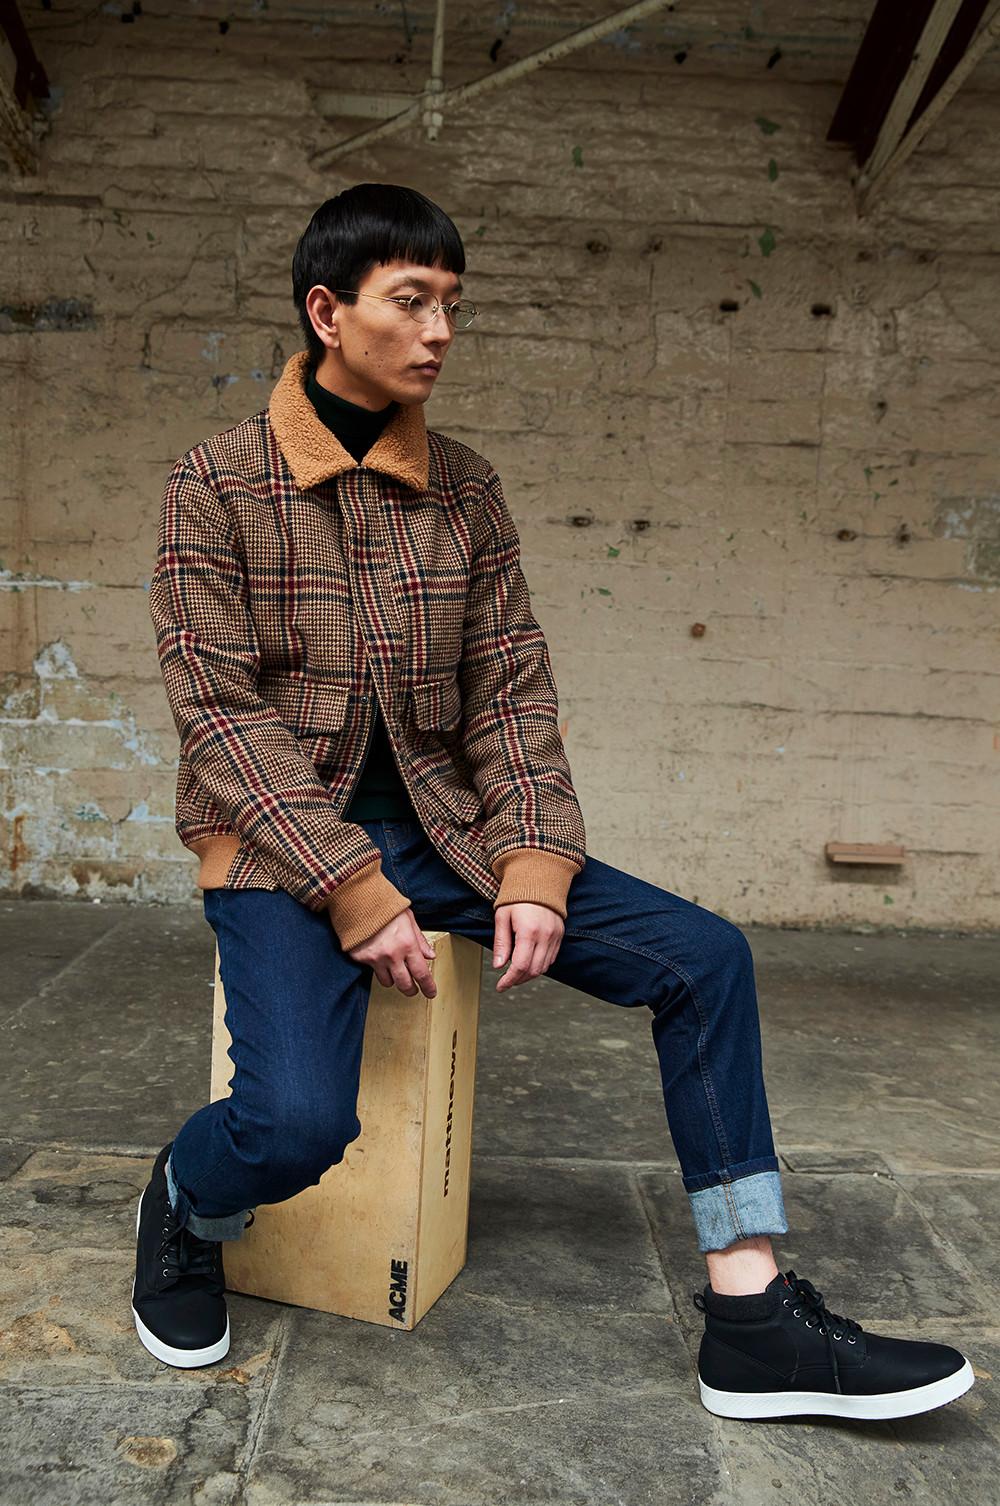 Model sits on box, wearing Checked Borg Aviator jacket, blue jeans and black shoes